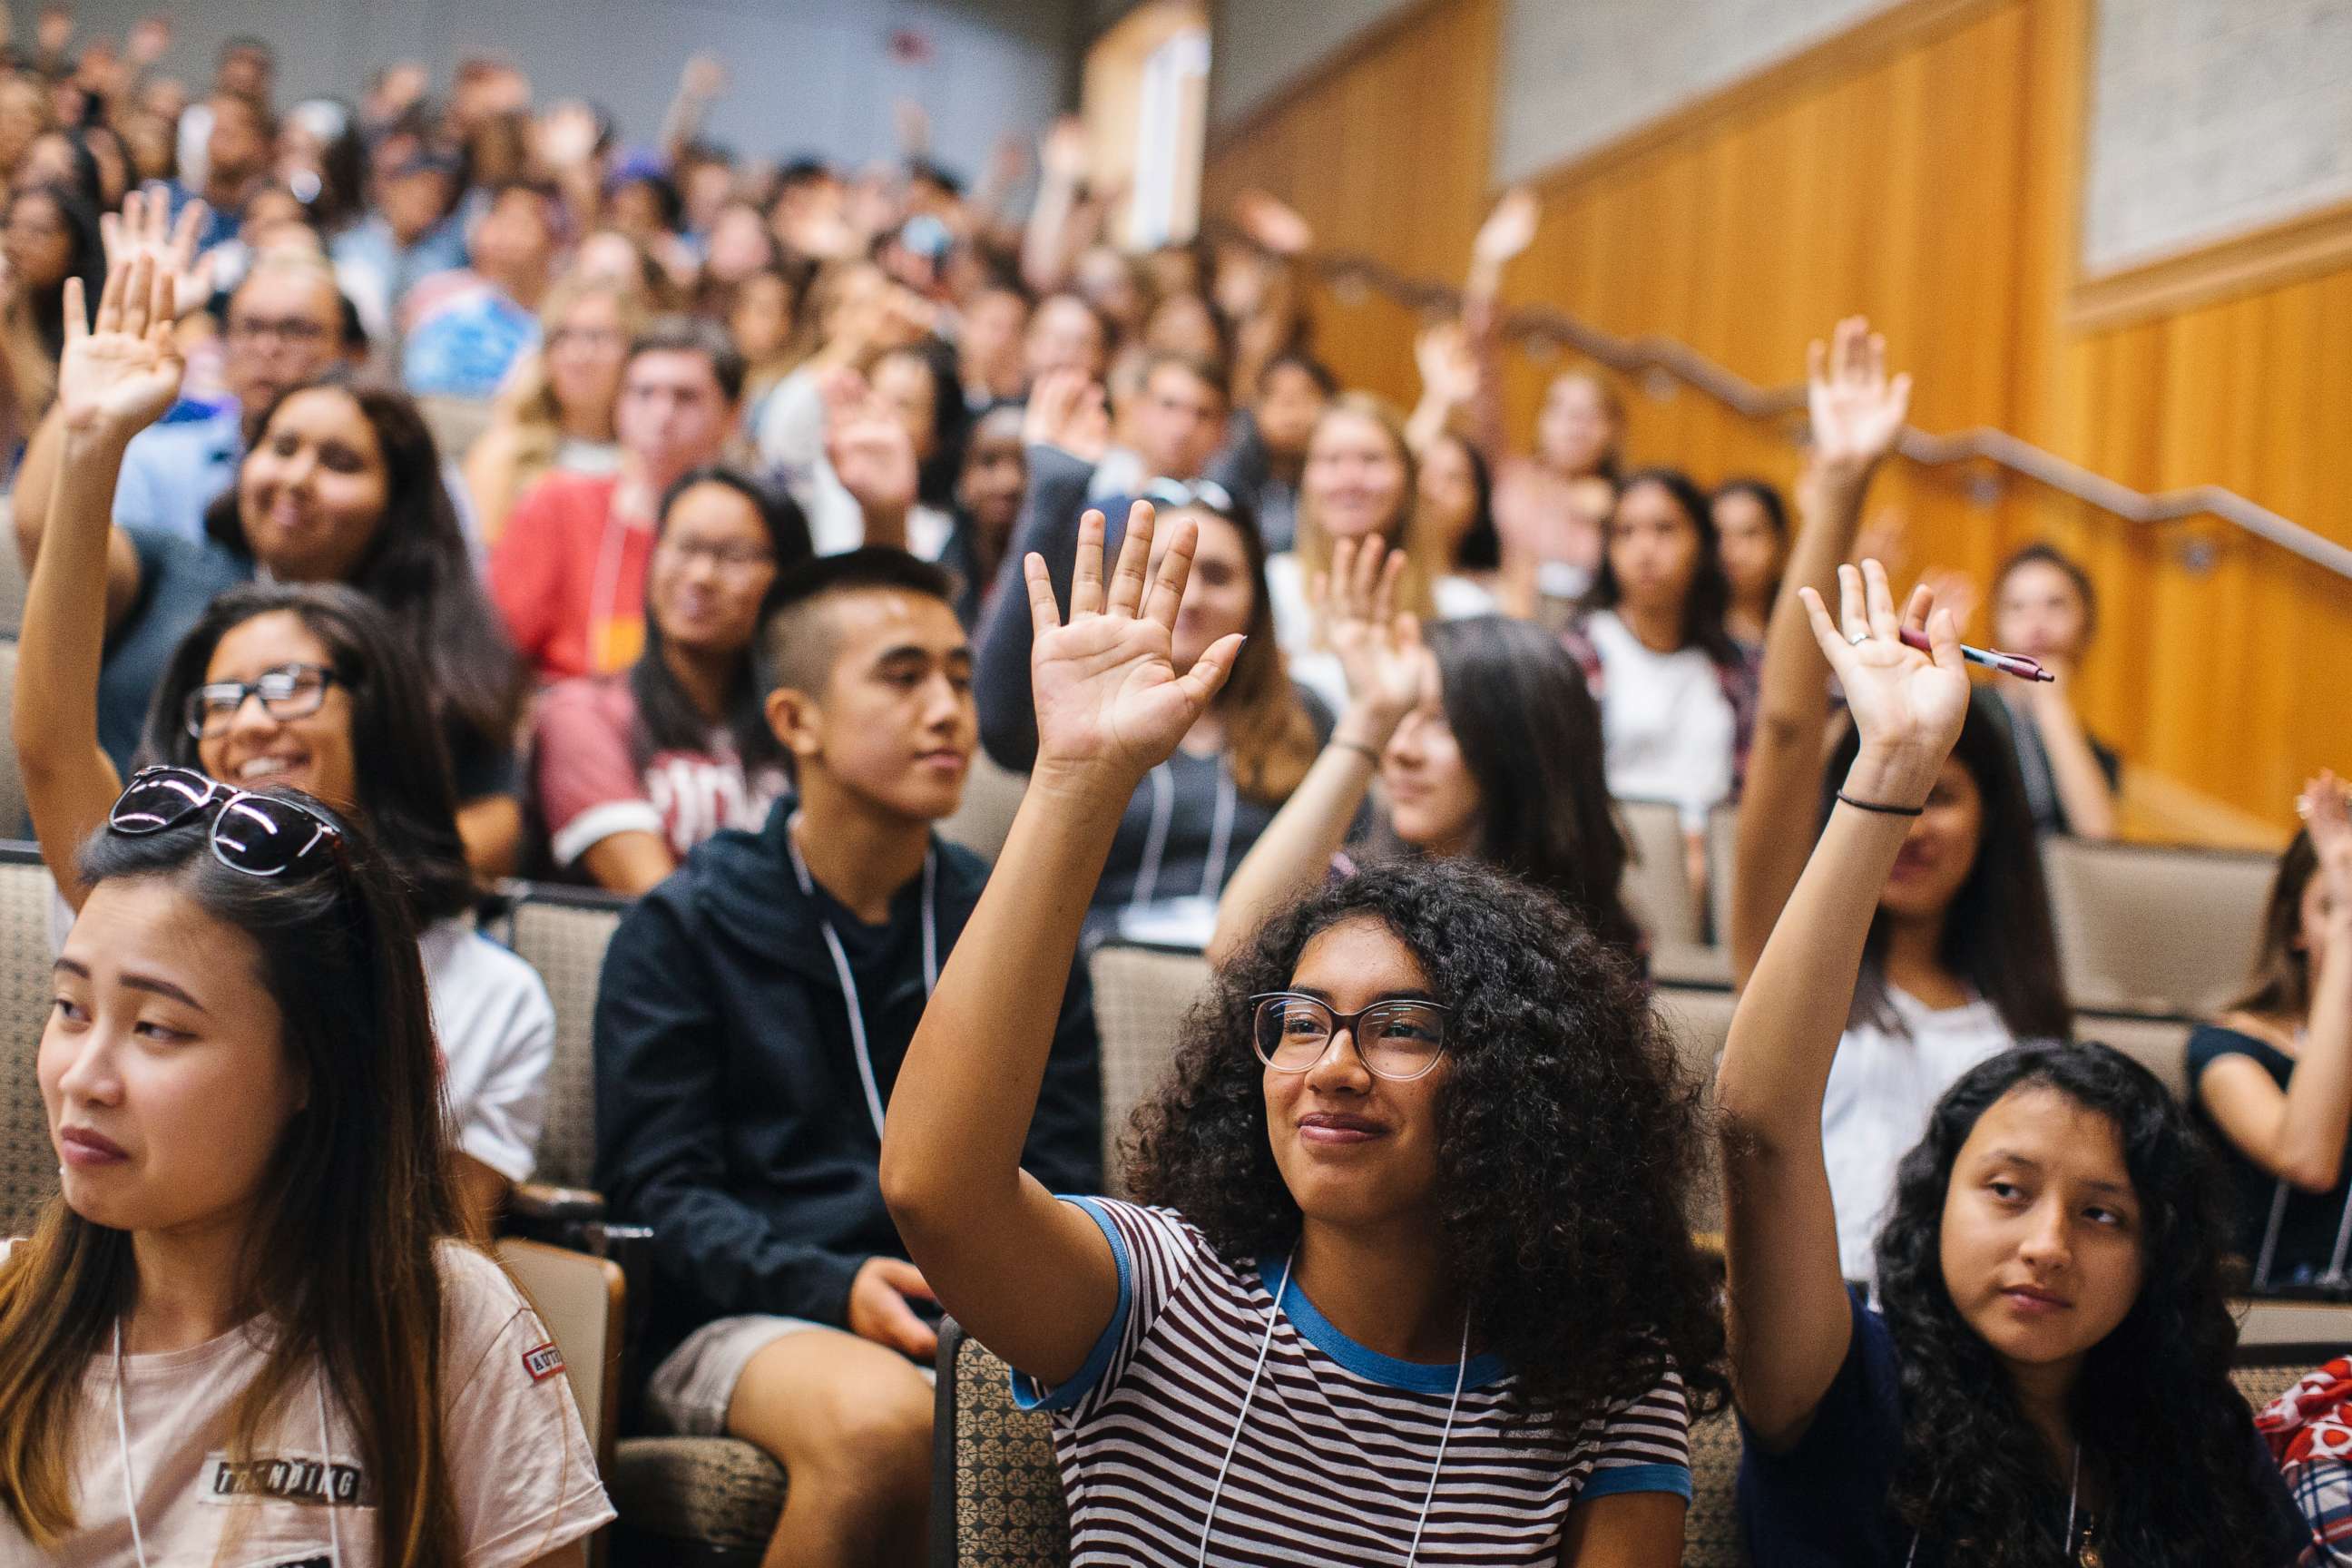 PHOTO: Students raise their hands to self-identify as first-generation during an orientation session at the University of California, Davis.